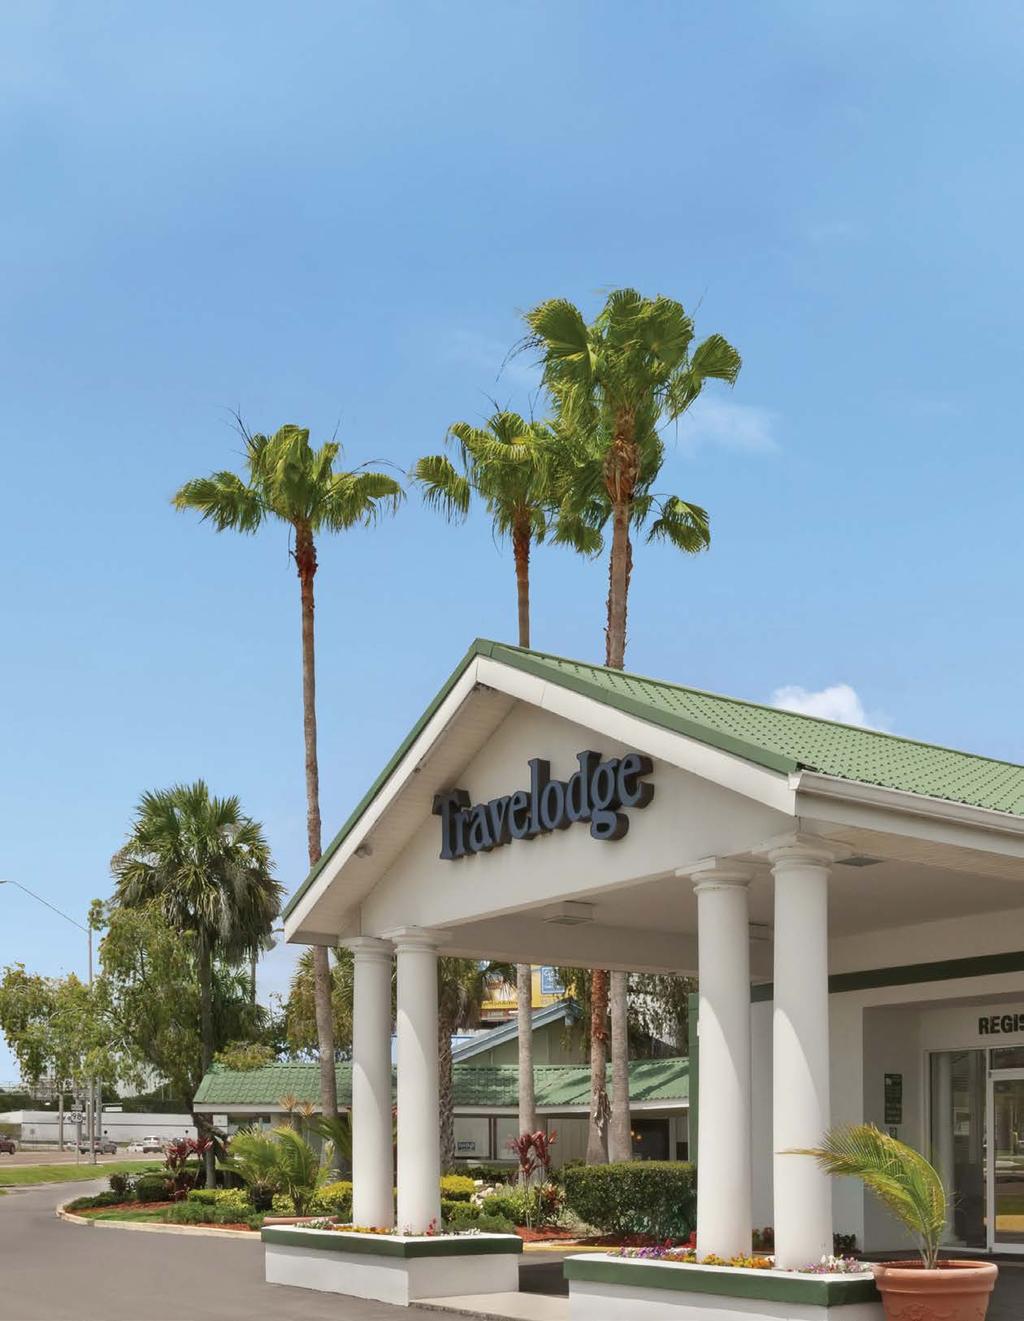 A SIGN OF SUCCESS SINCE IT FIRST OPENED ITS DOORS IN 1940, TRAVELODGE HAS BUILT A HIGH LEVEL OF AWARENESS AROUND ITS STRONG WEST COAST-FOCUSED FOOTPRINT.